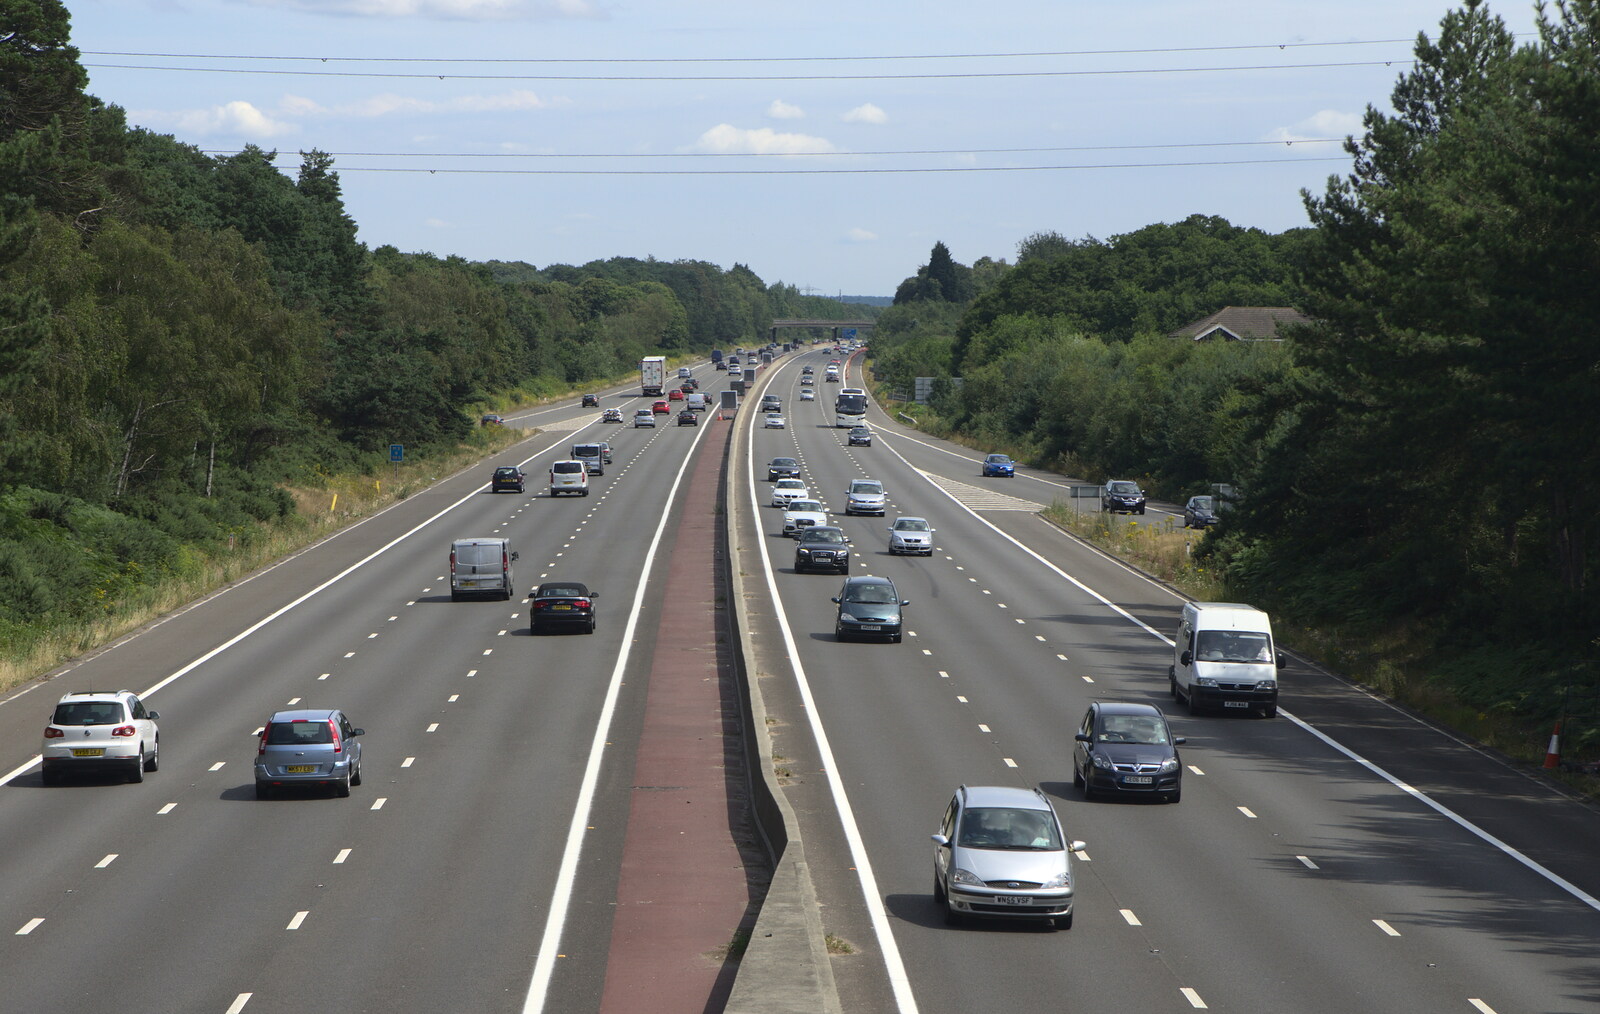 M3 looking southbound from Bob and Bernice's 50th Wedding Anniversary, Hinton Admiral, Dorset - 25th July 2014